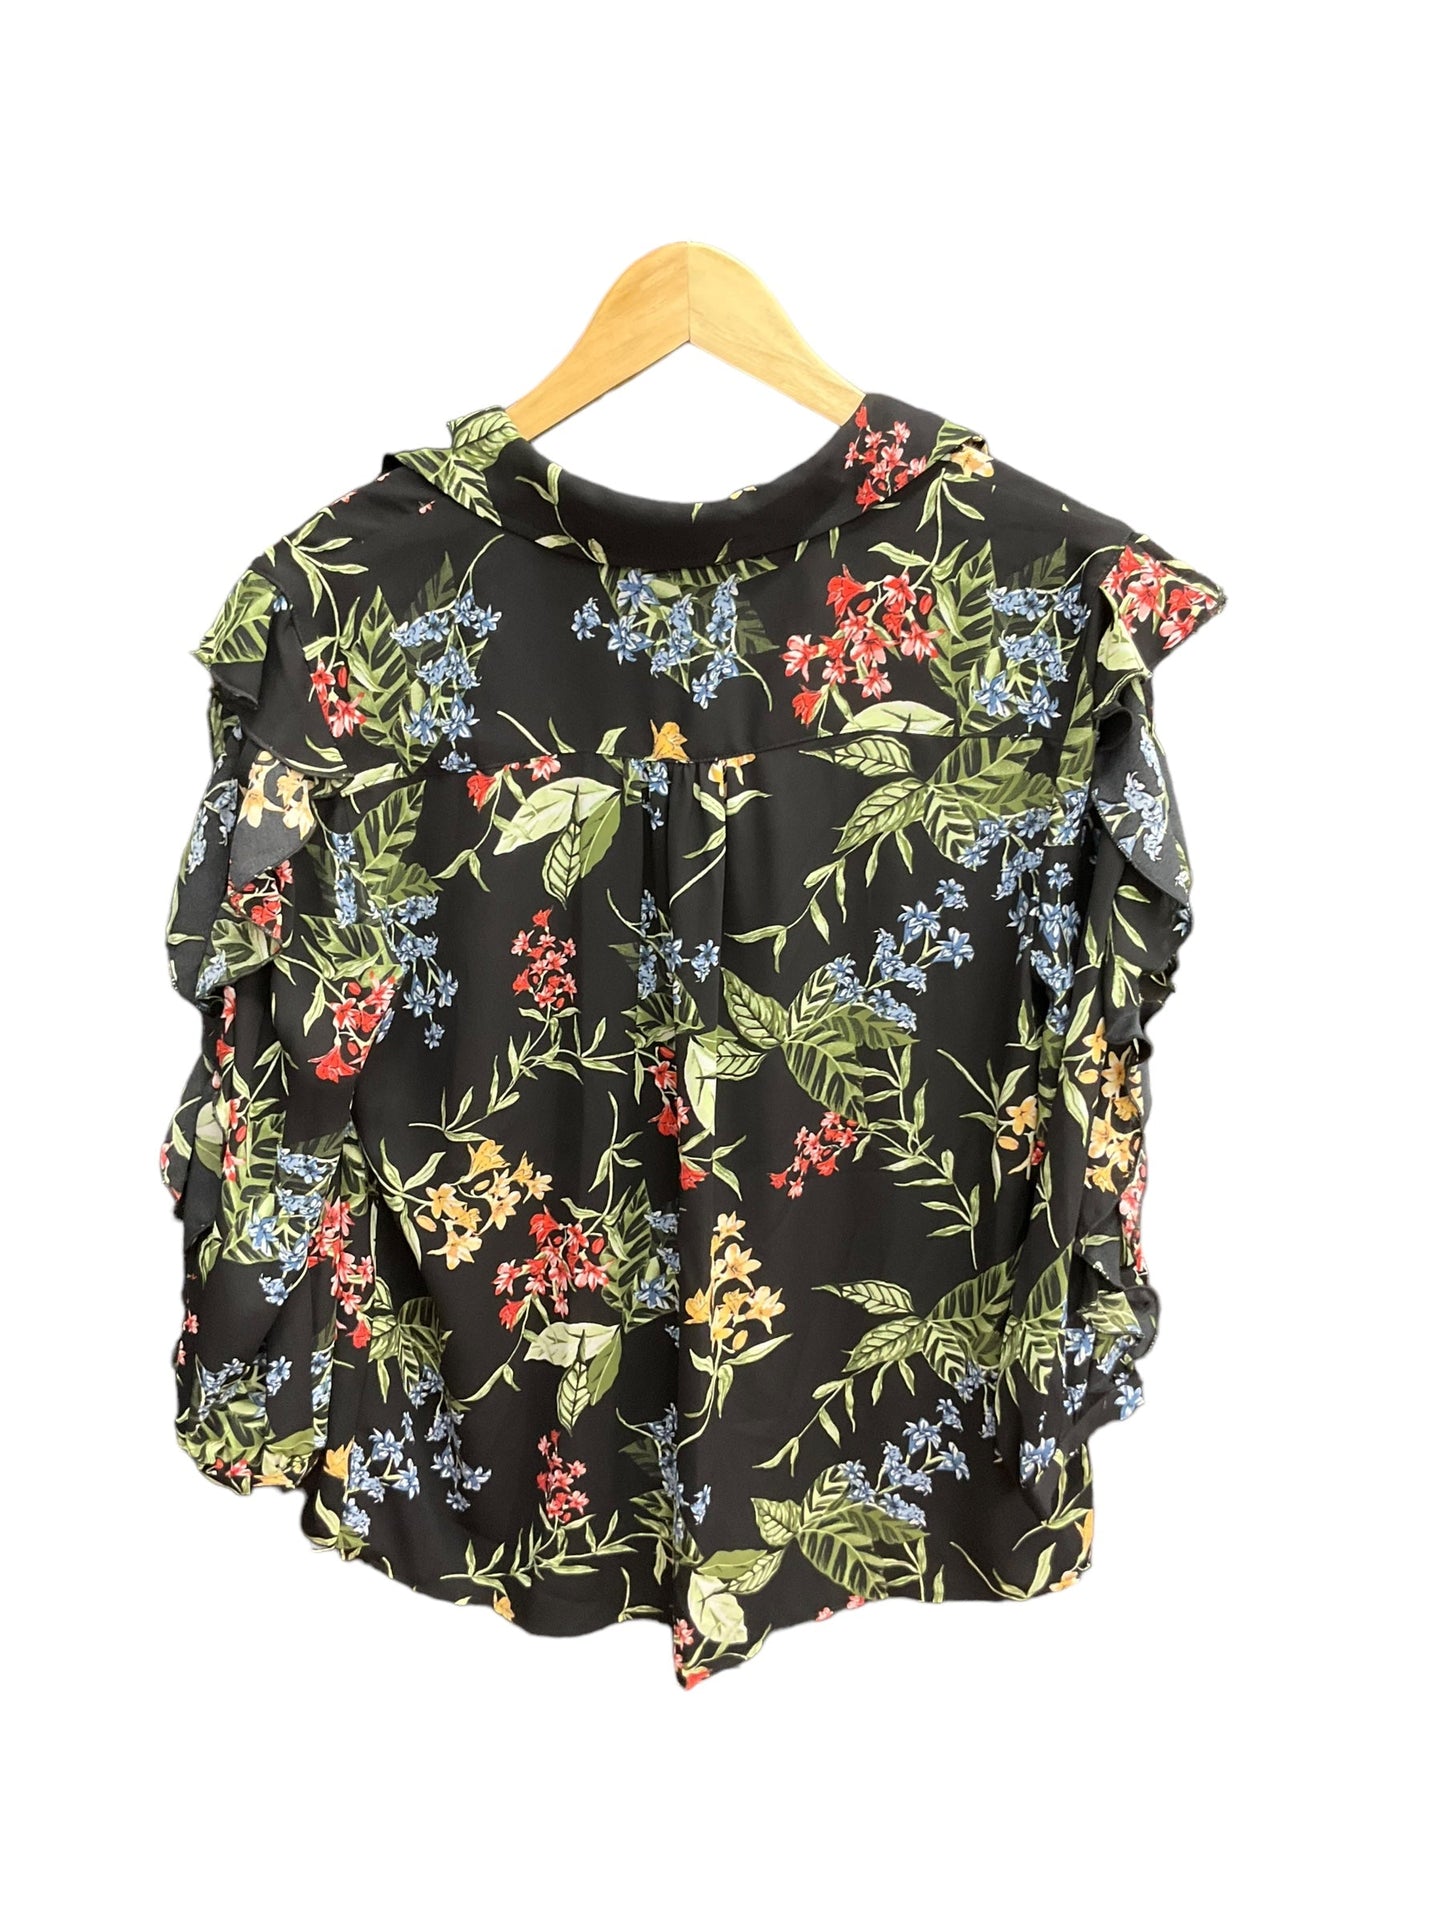 Floral Print Blouse Long Sleeve Investments, Size M